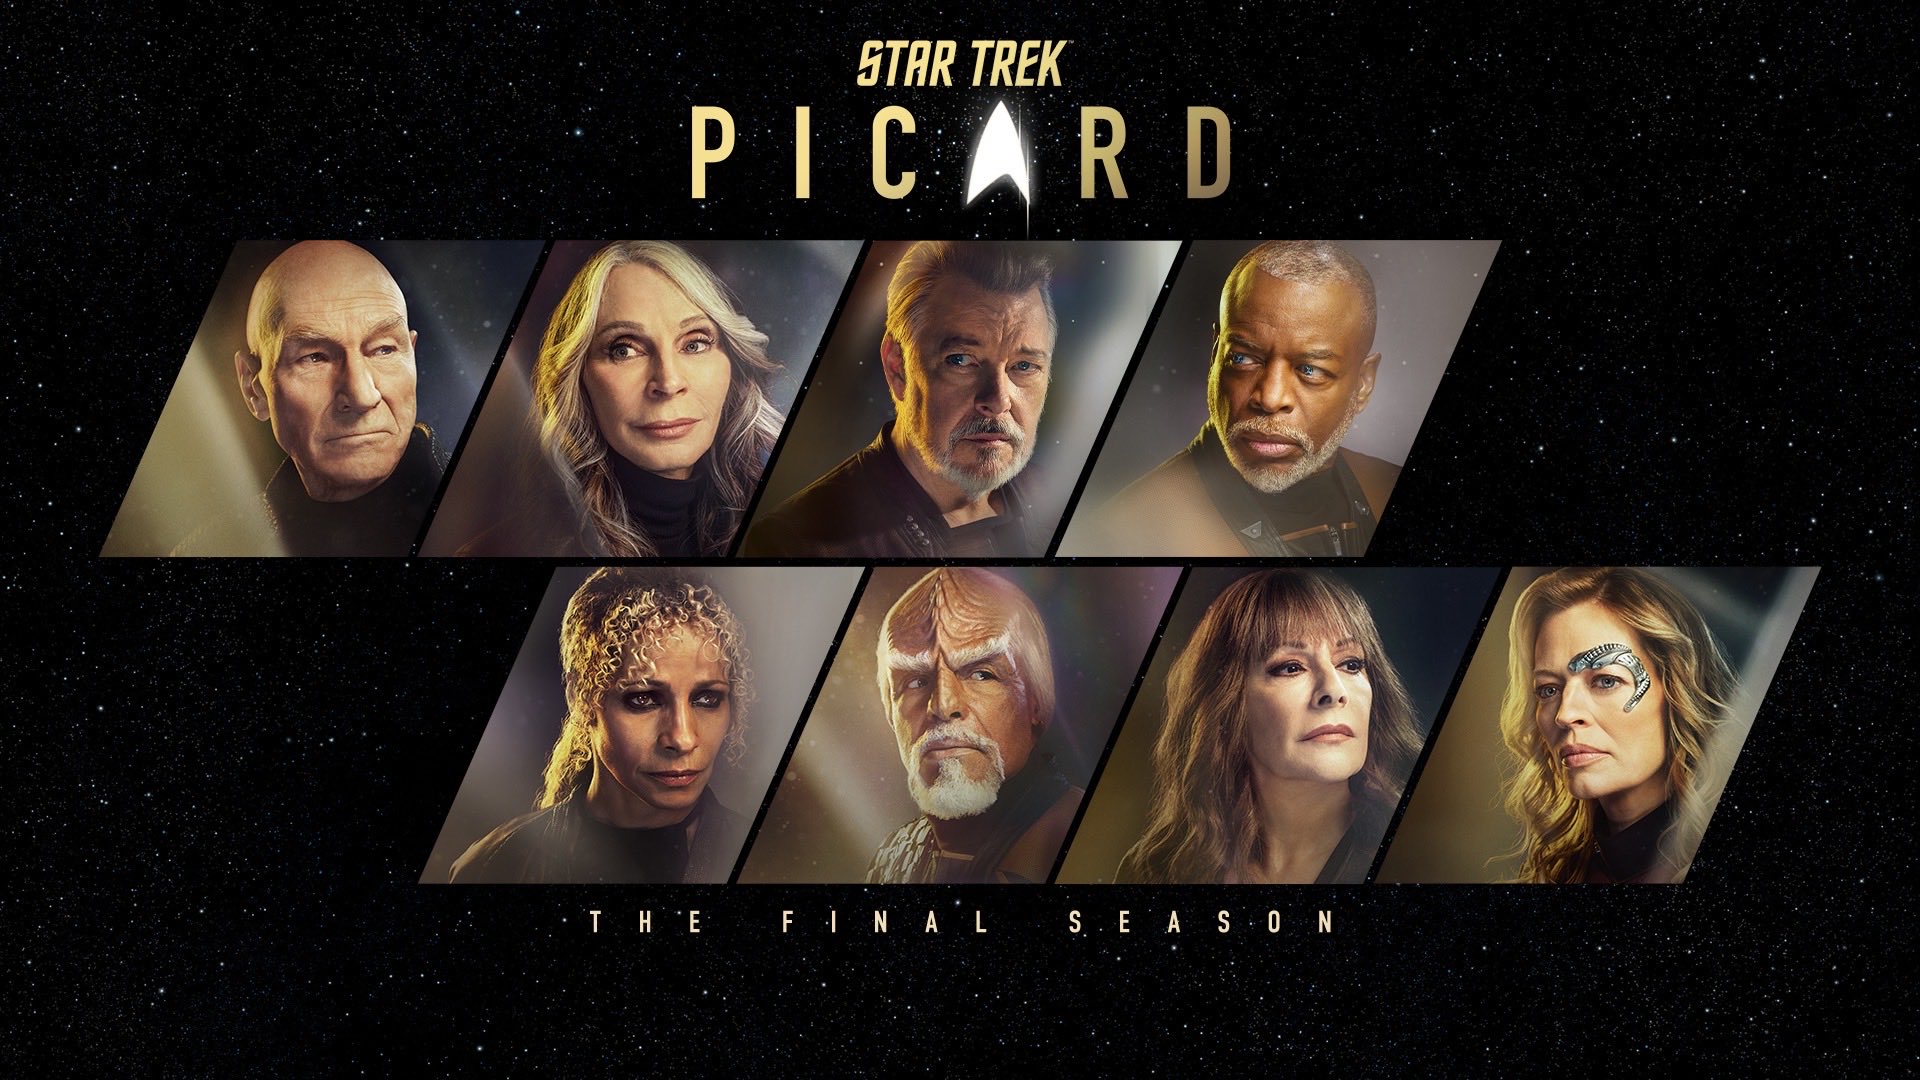 Star Trek: Picard Season 3 Release Date, Cast, Trailer & Everything You Need To Know